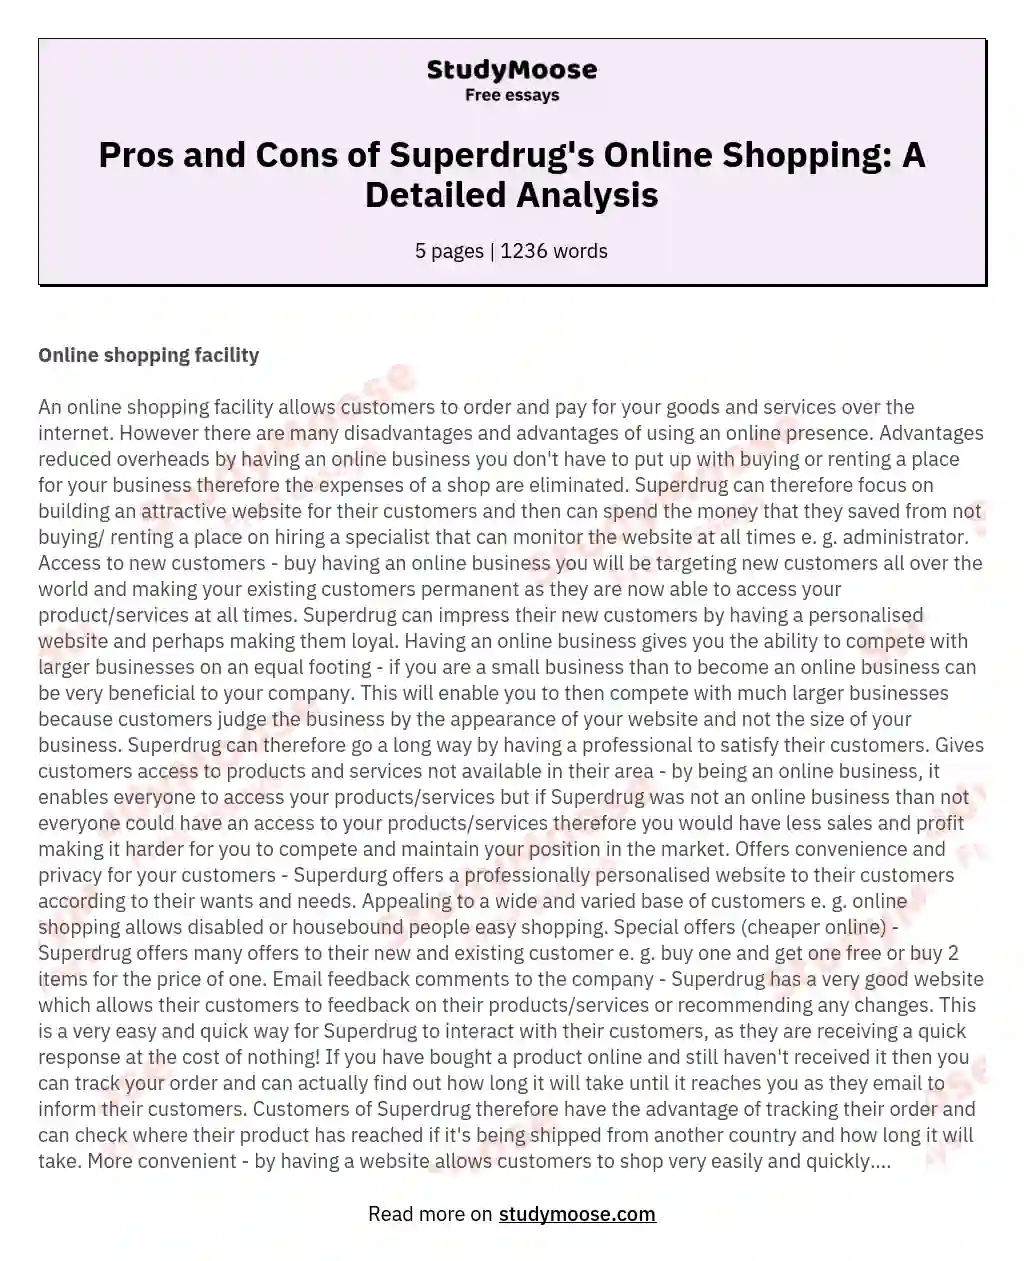 Pros and Cons of Superdrug's Online Shopping: A Detailed Analysis essay